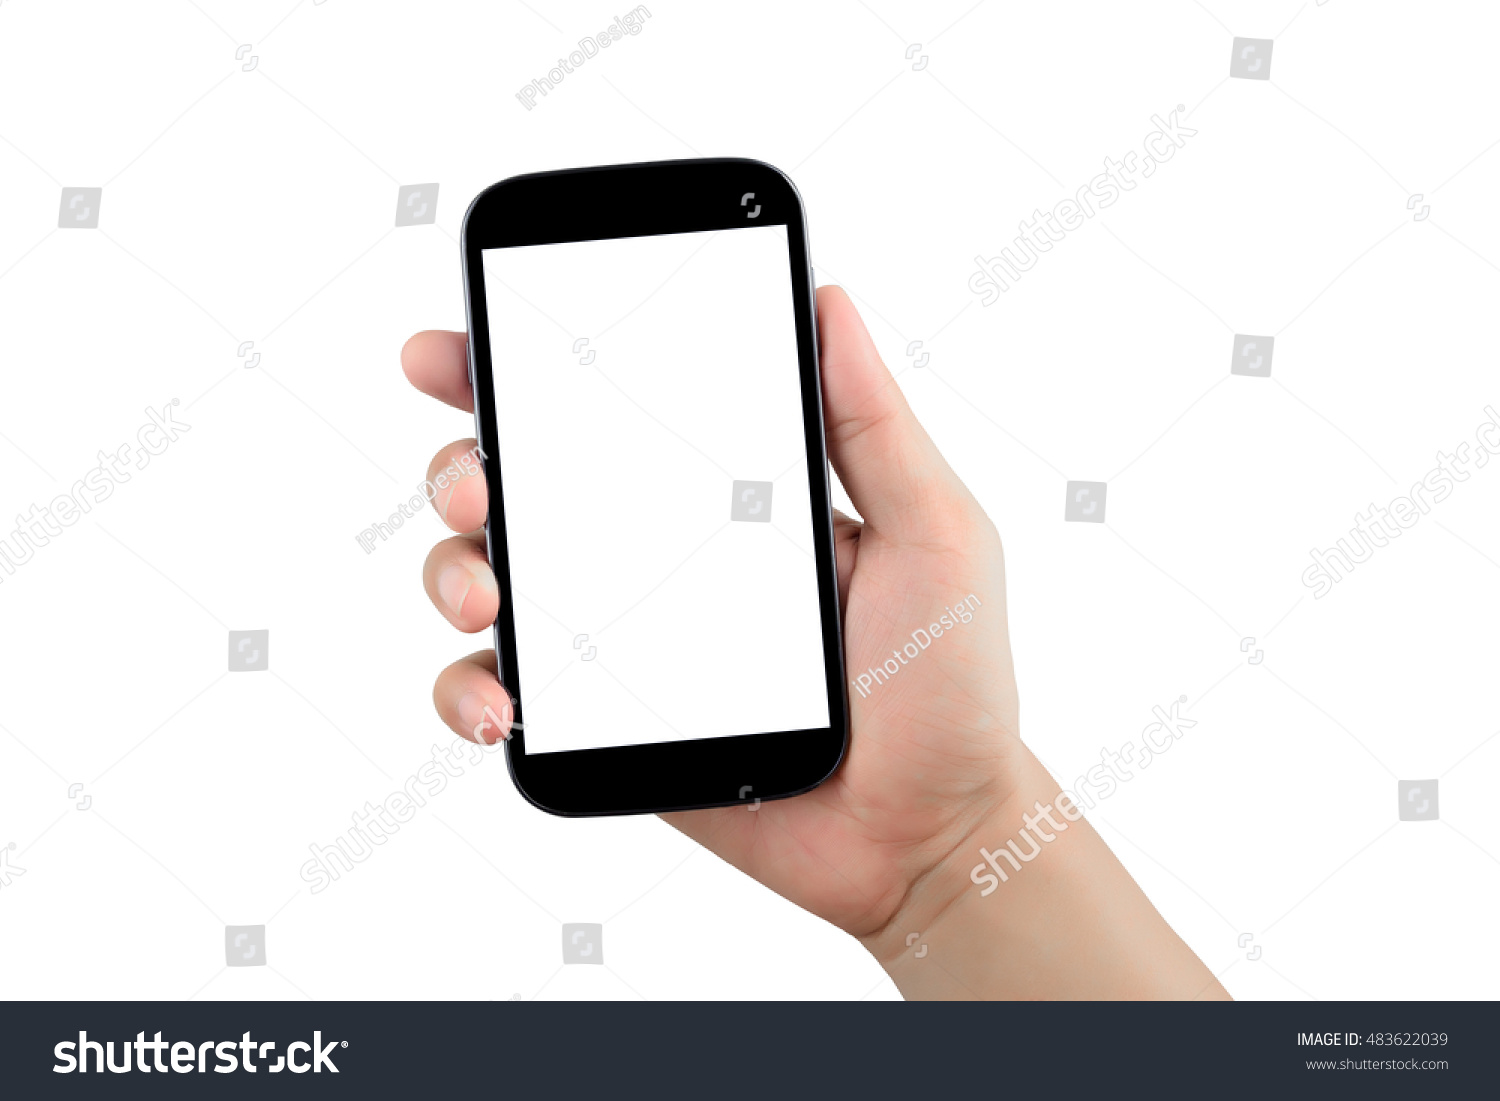 right hand holding black smartphone and blank screen isolated on white background with clipping path #483622039